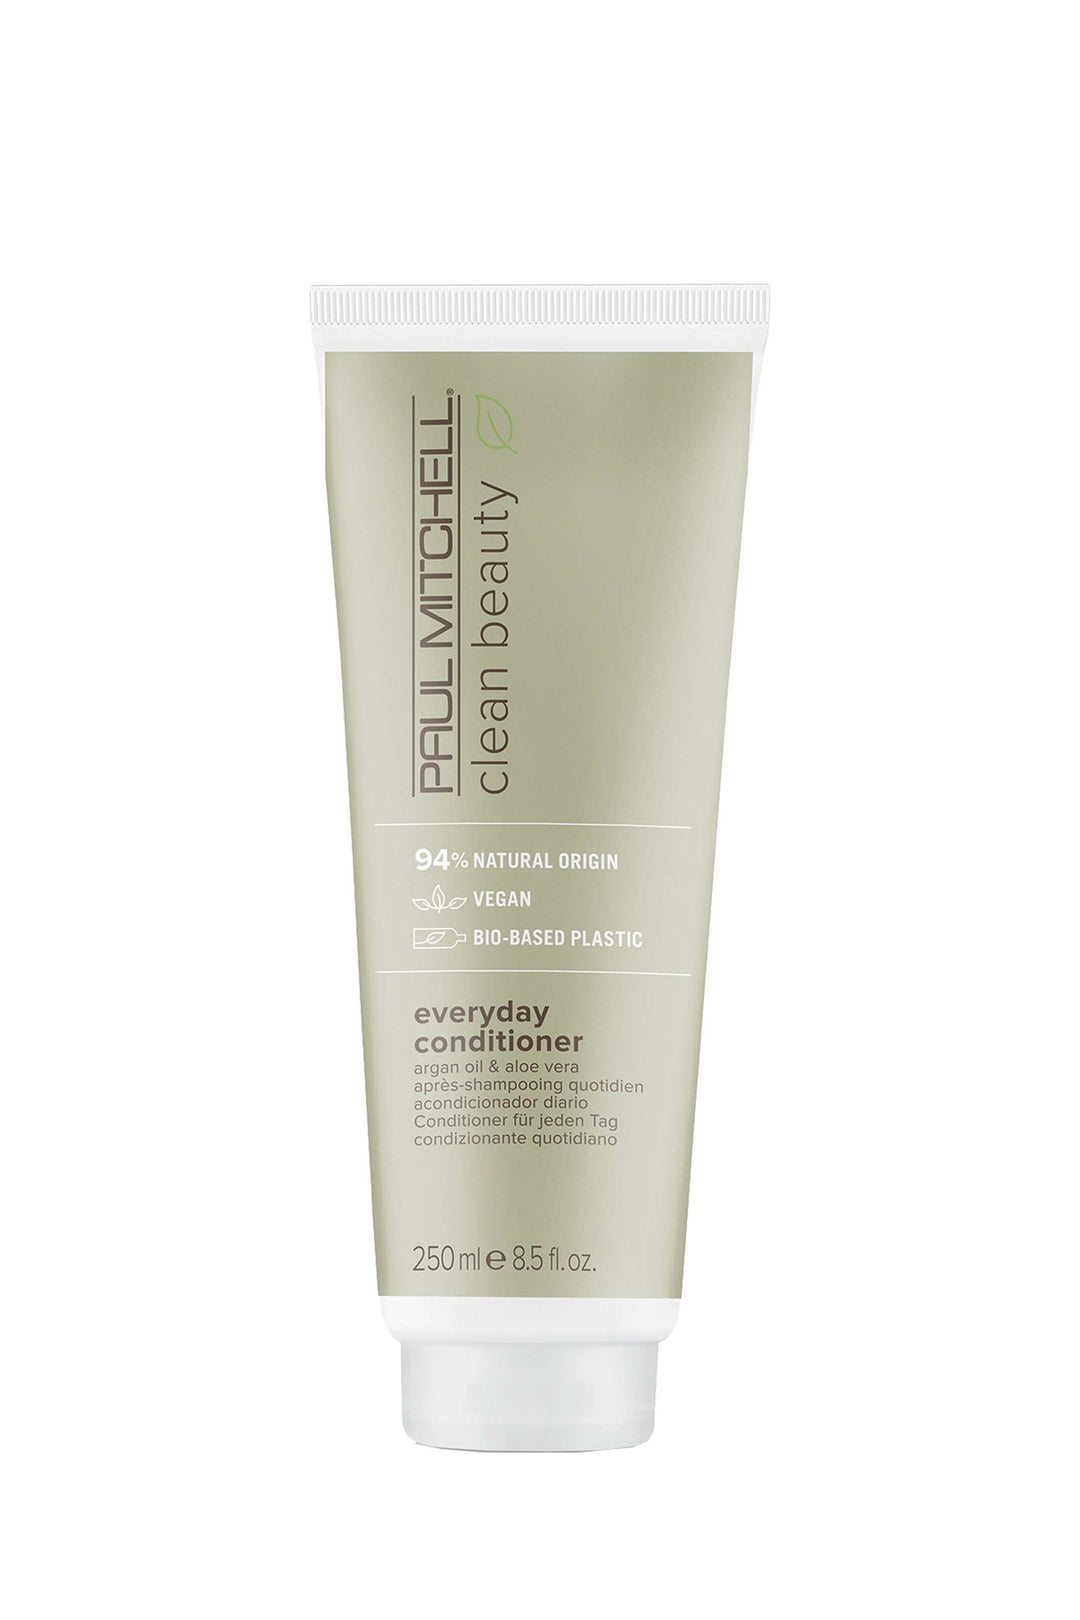 paul-mitchell-clean-beauty-everyday-conditioner-250ml